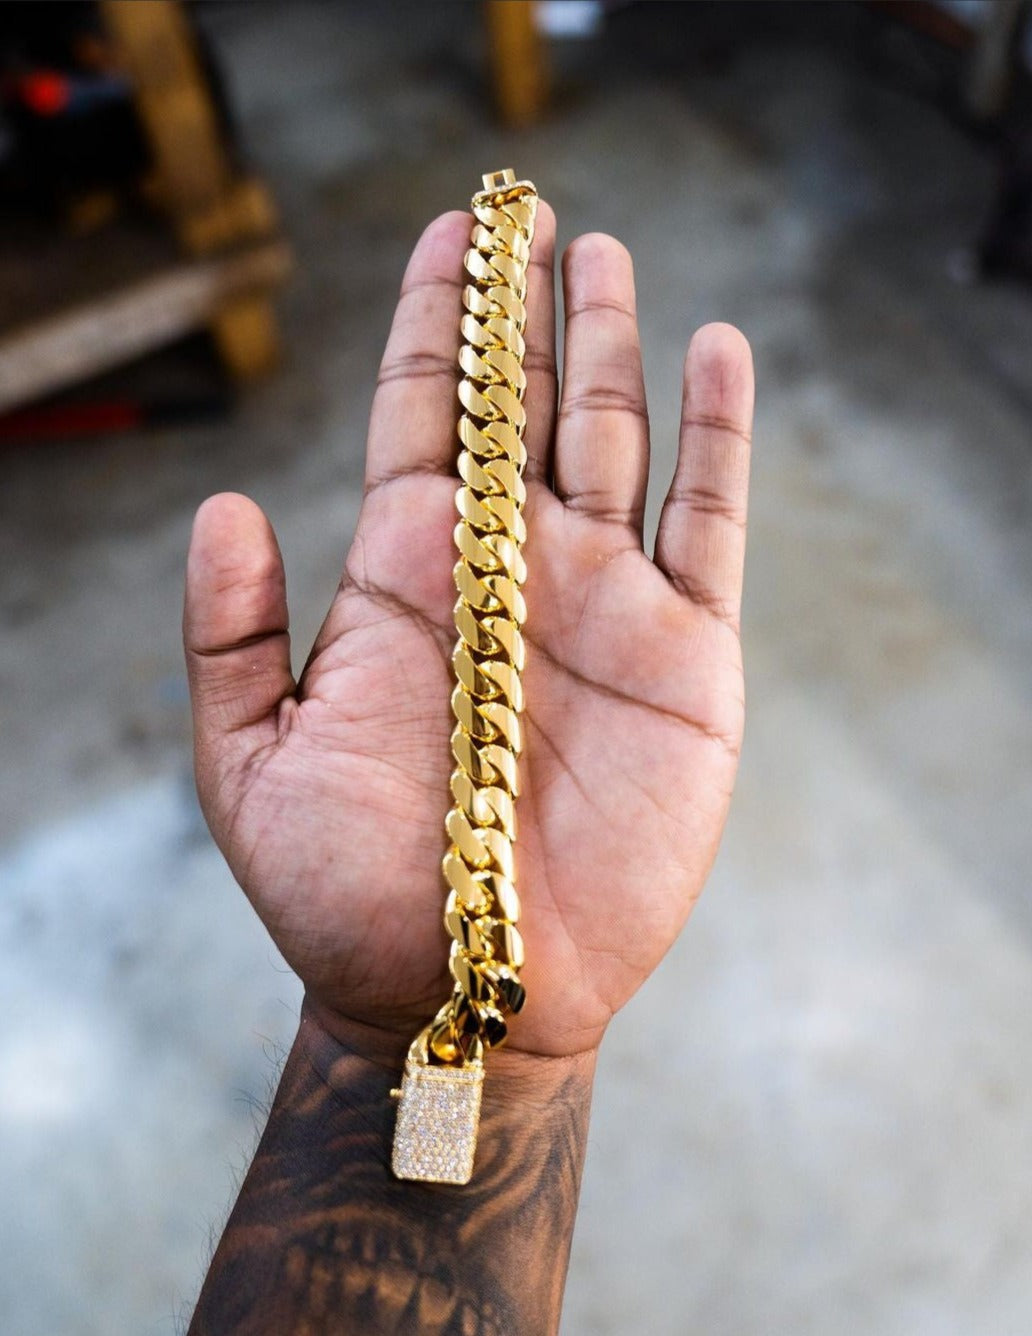 RARE PRINCE by CARAT SUTRA | Solid 10mm Miami Cuban Link Bracelet with Iced Lock | 22kt Gold Micron Plated on 925 Sterling Silver Bracelet with AAA+ Quality Swarovski Diamonds | Men's Jewelry | With Certificate of Authenticity and 925 Hallmark - caratsutra